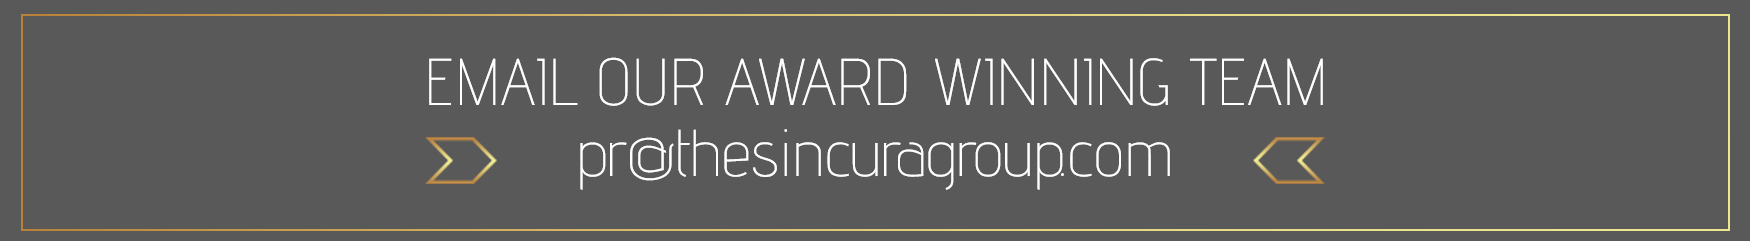 email sincura's award winning pr team in the uk and worldwide for all your public relations requirements